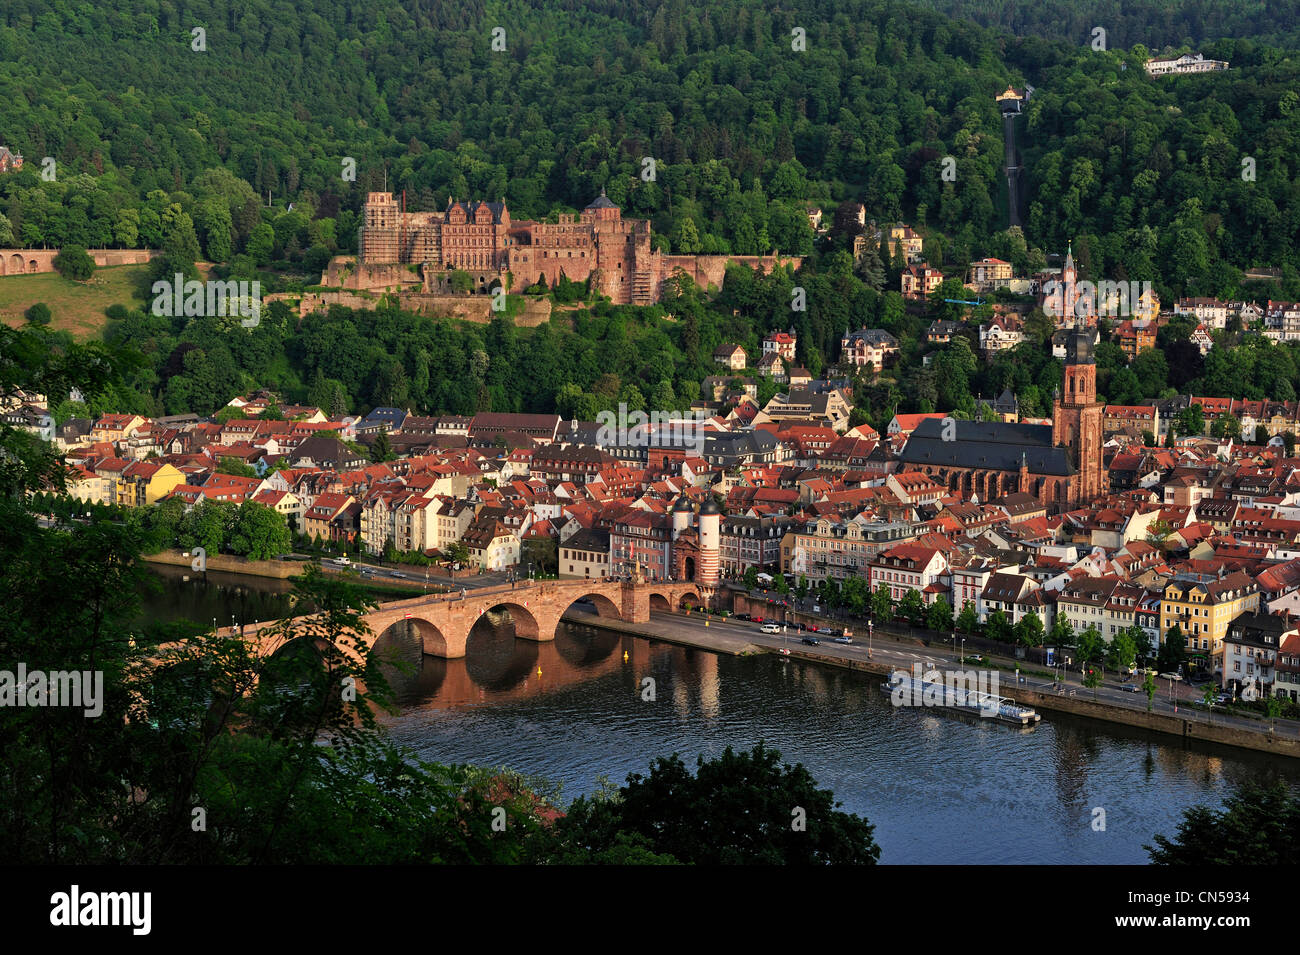 Germany, Baden Württemberg, Heidelberg, the city, the castle from the right bank of the Neckar and the old bridge Karl-Theodor Stock Photo